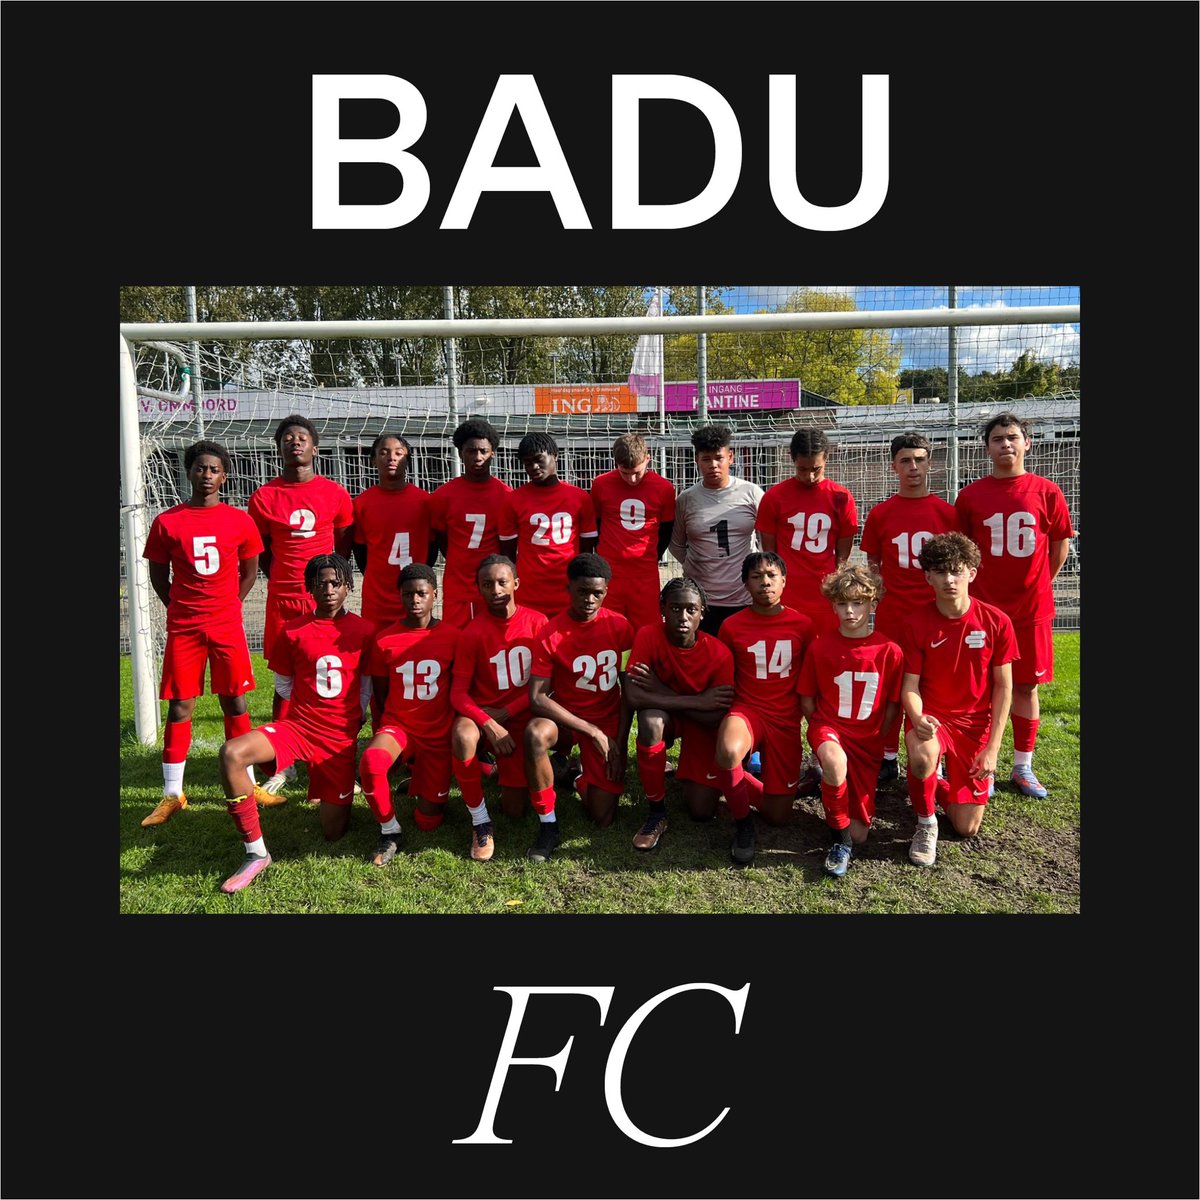 It’s heartbreaking that at every age and walk of life racism is present. We will not let this behaviour take away from what they have achieved and we will celebrate them for their greatness🥇⚽️#teambadu #thebaduway